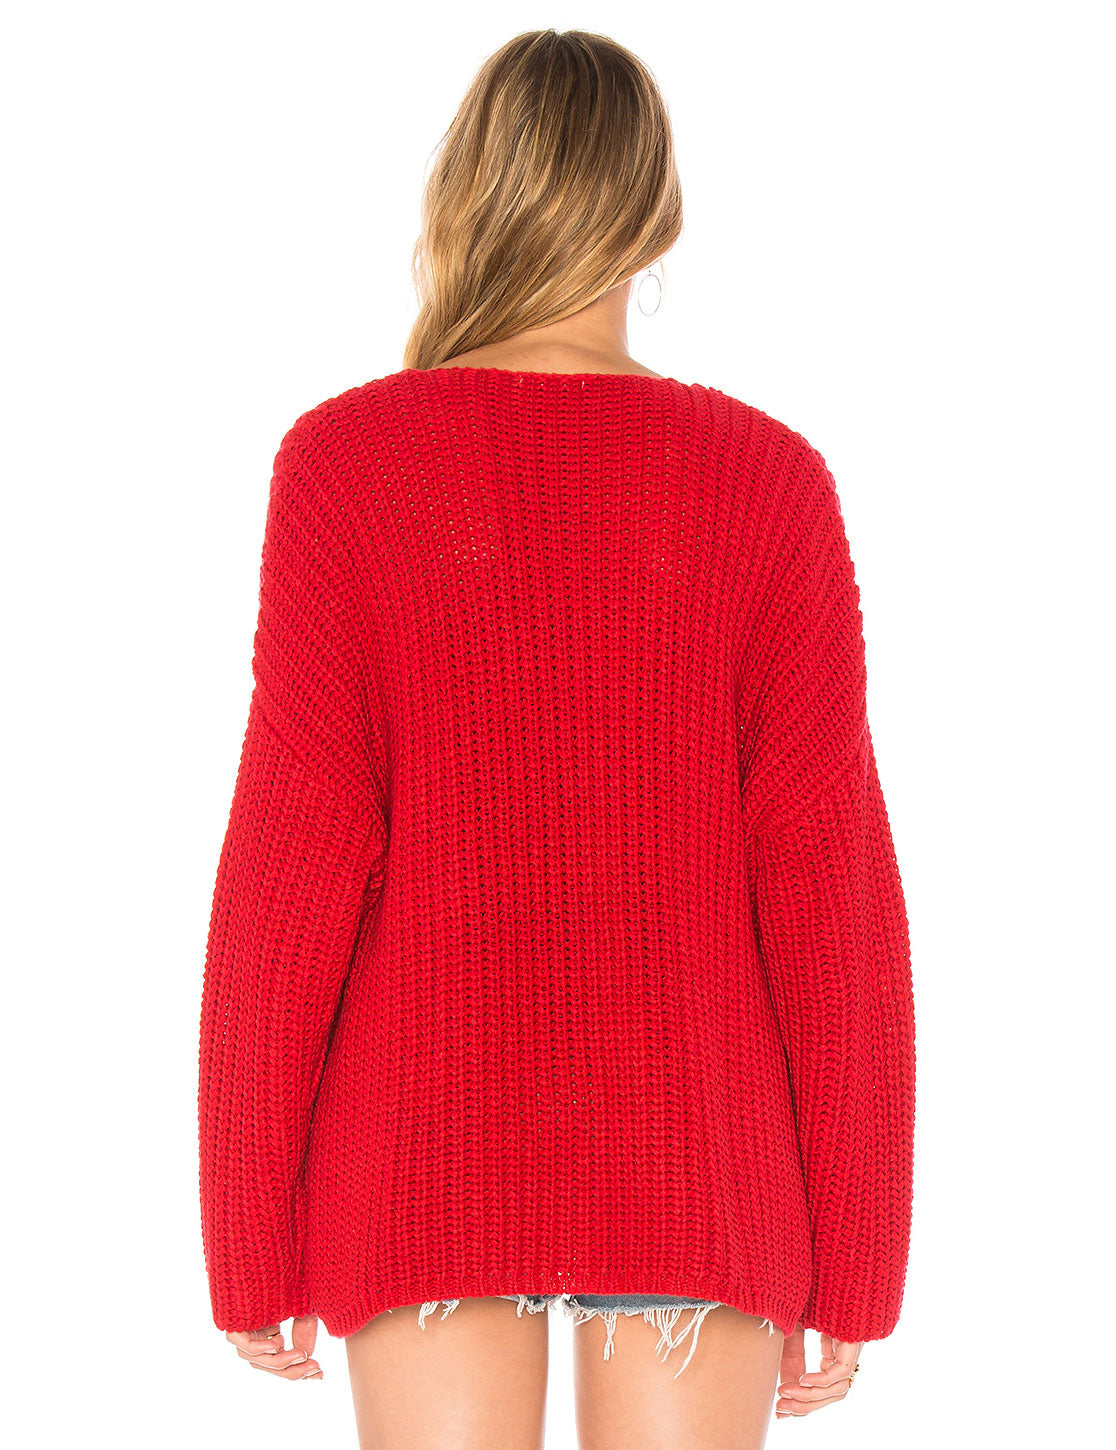 Adams Sweater in RED